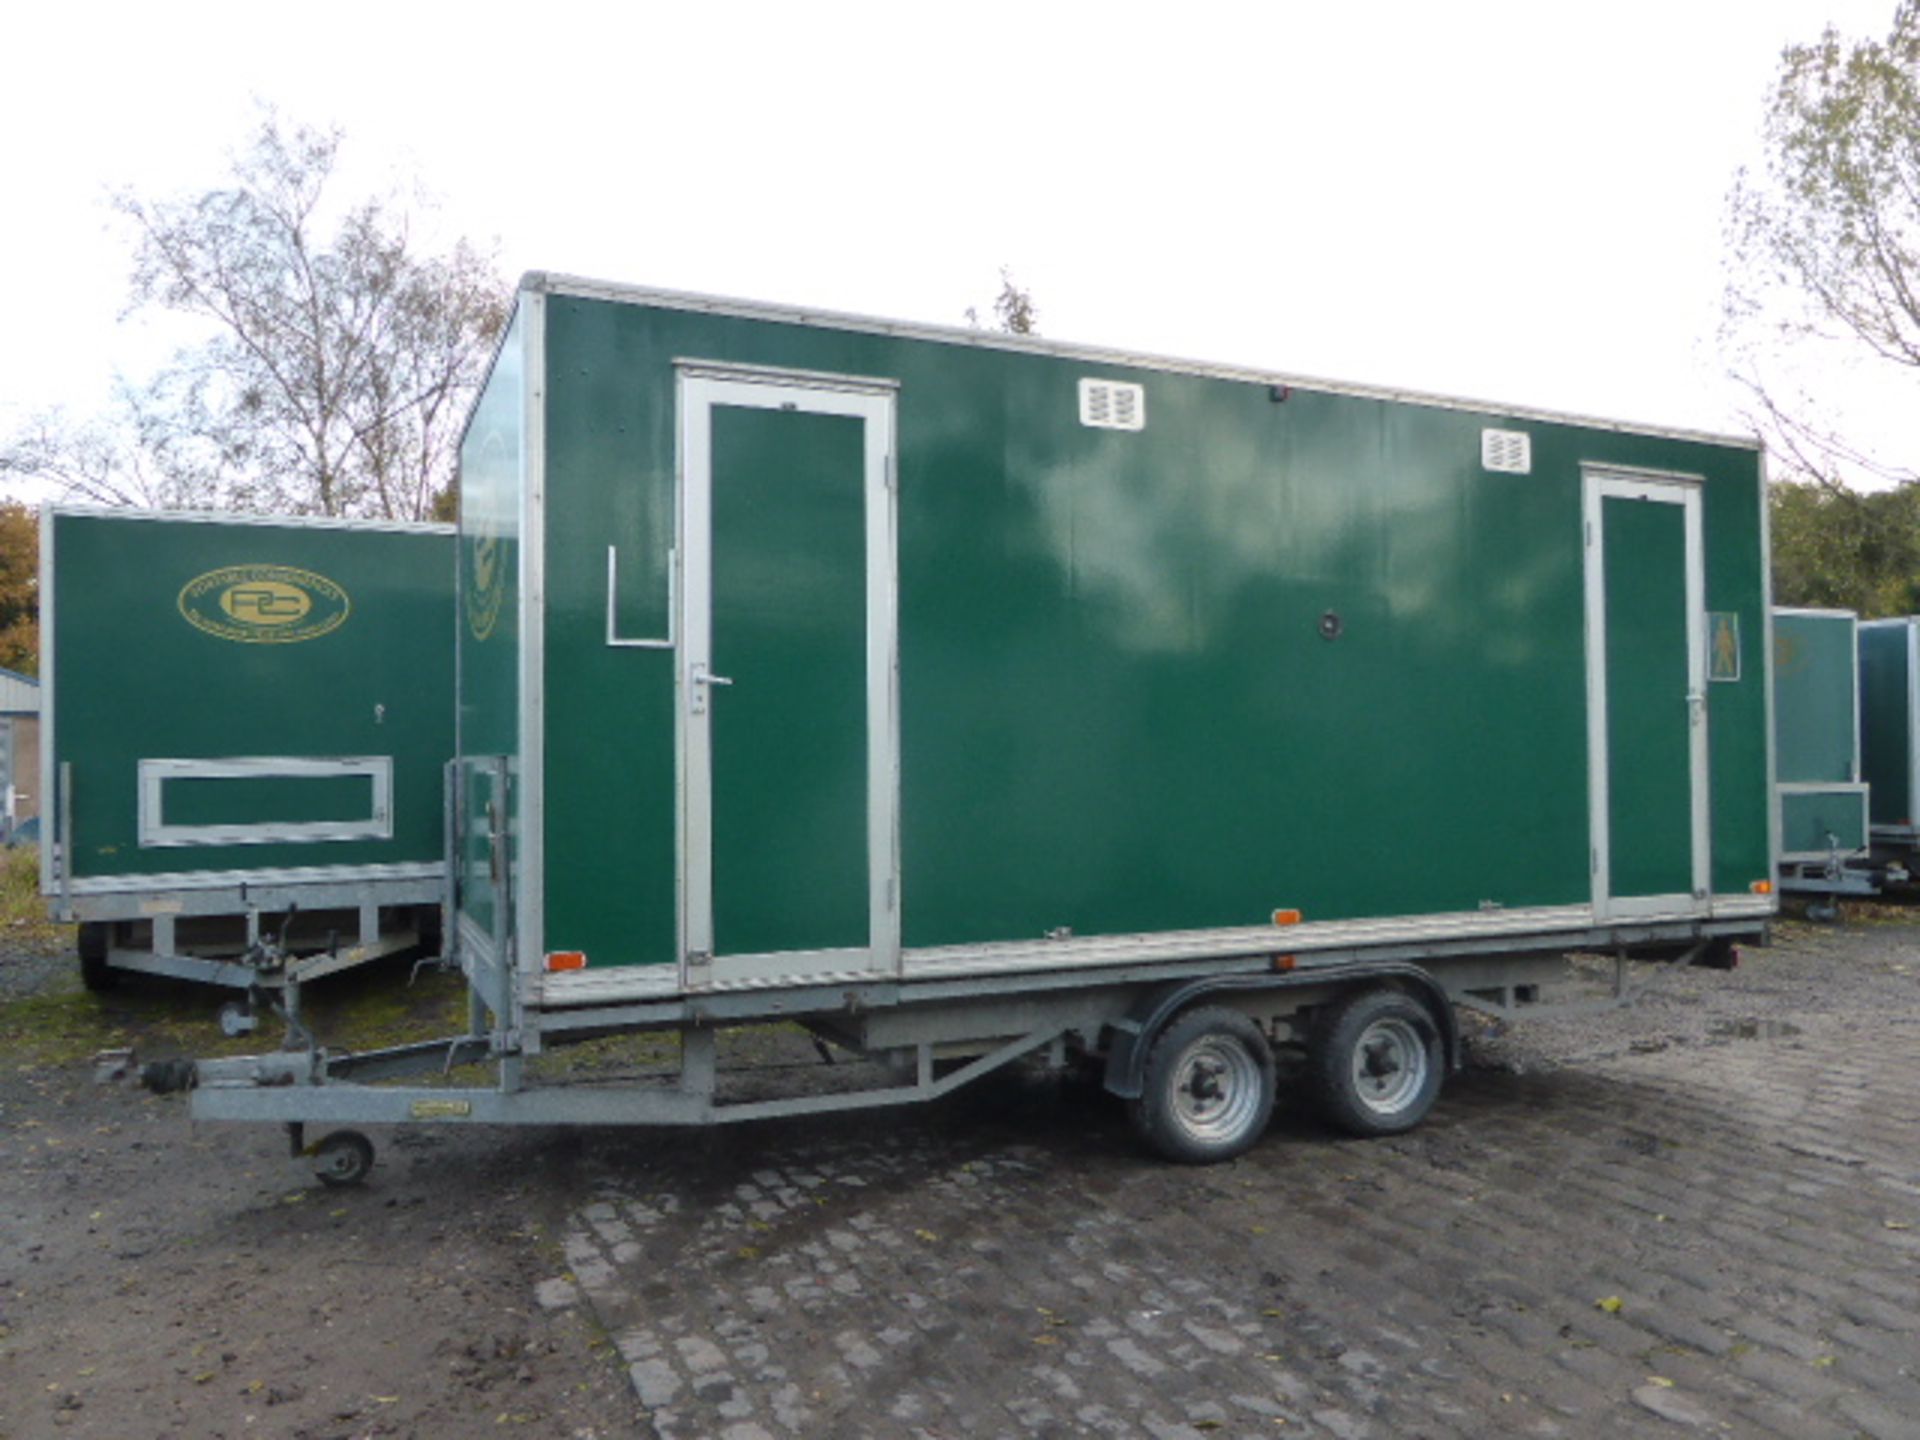 Salesbury luxury 3 + 1 toilet trailer on twin axle with recirculation unit by Premier Mobile (code - Image 2 of 16